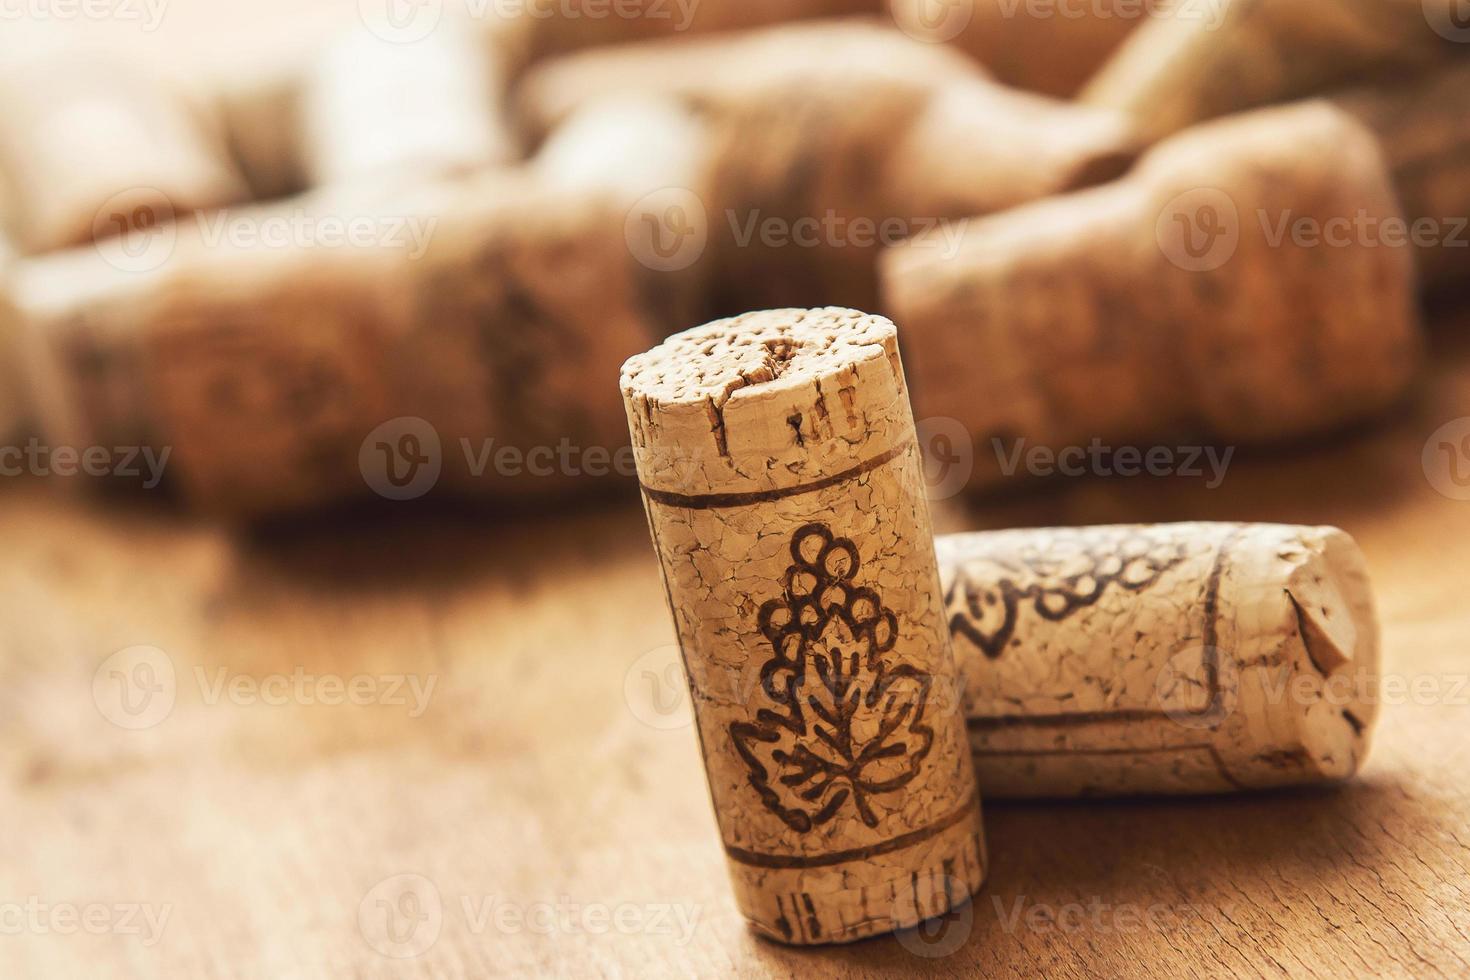 Wine corks on wooden table photo